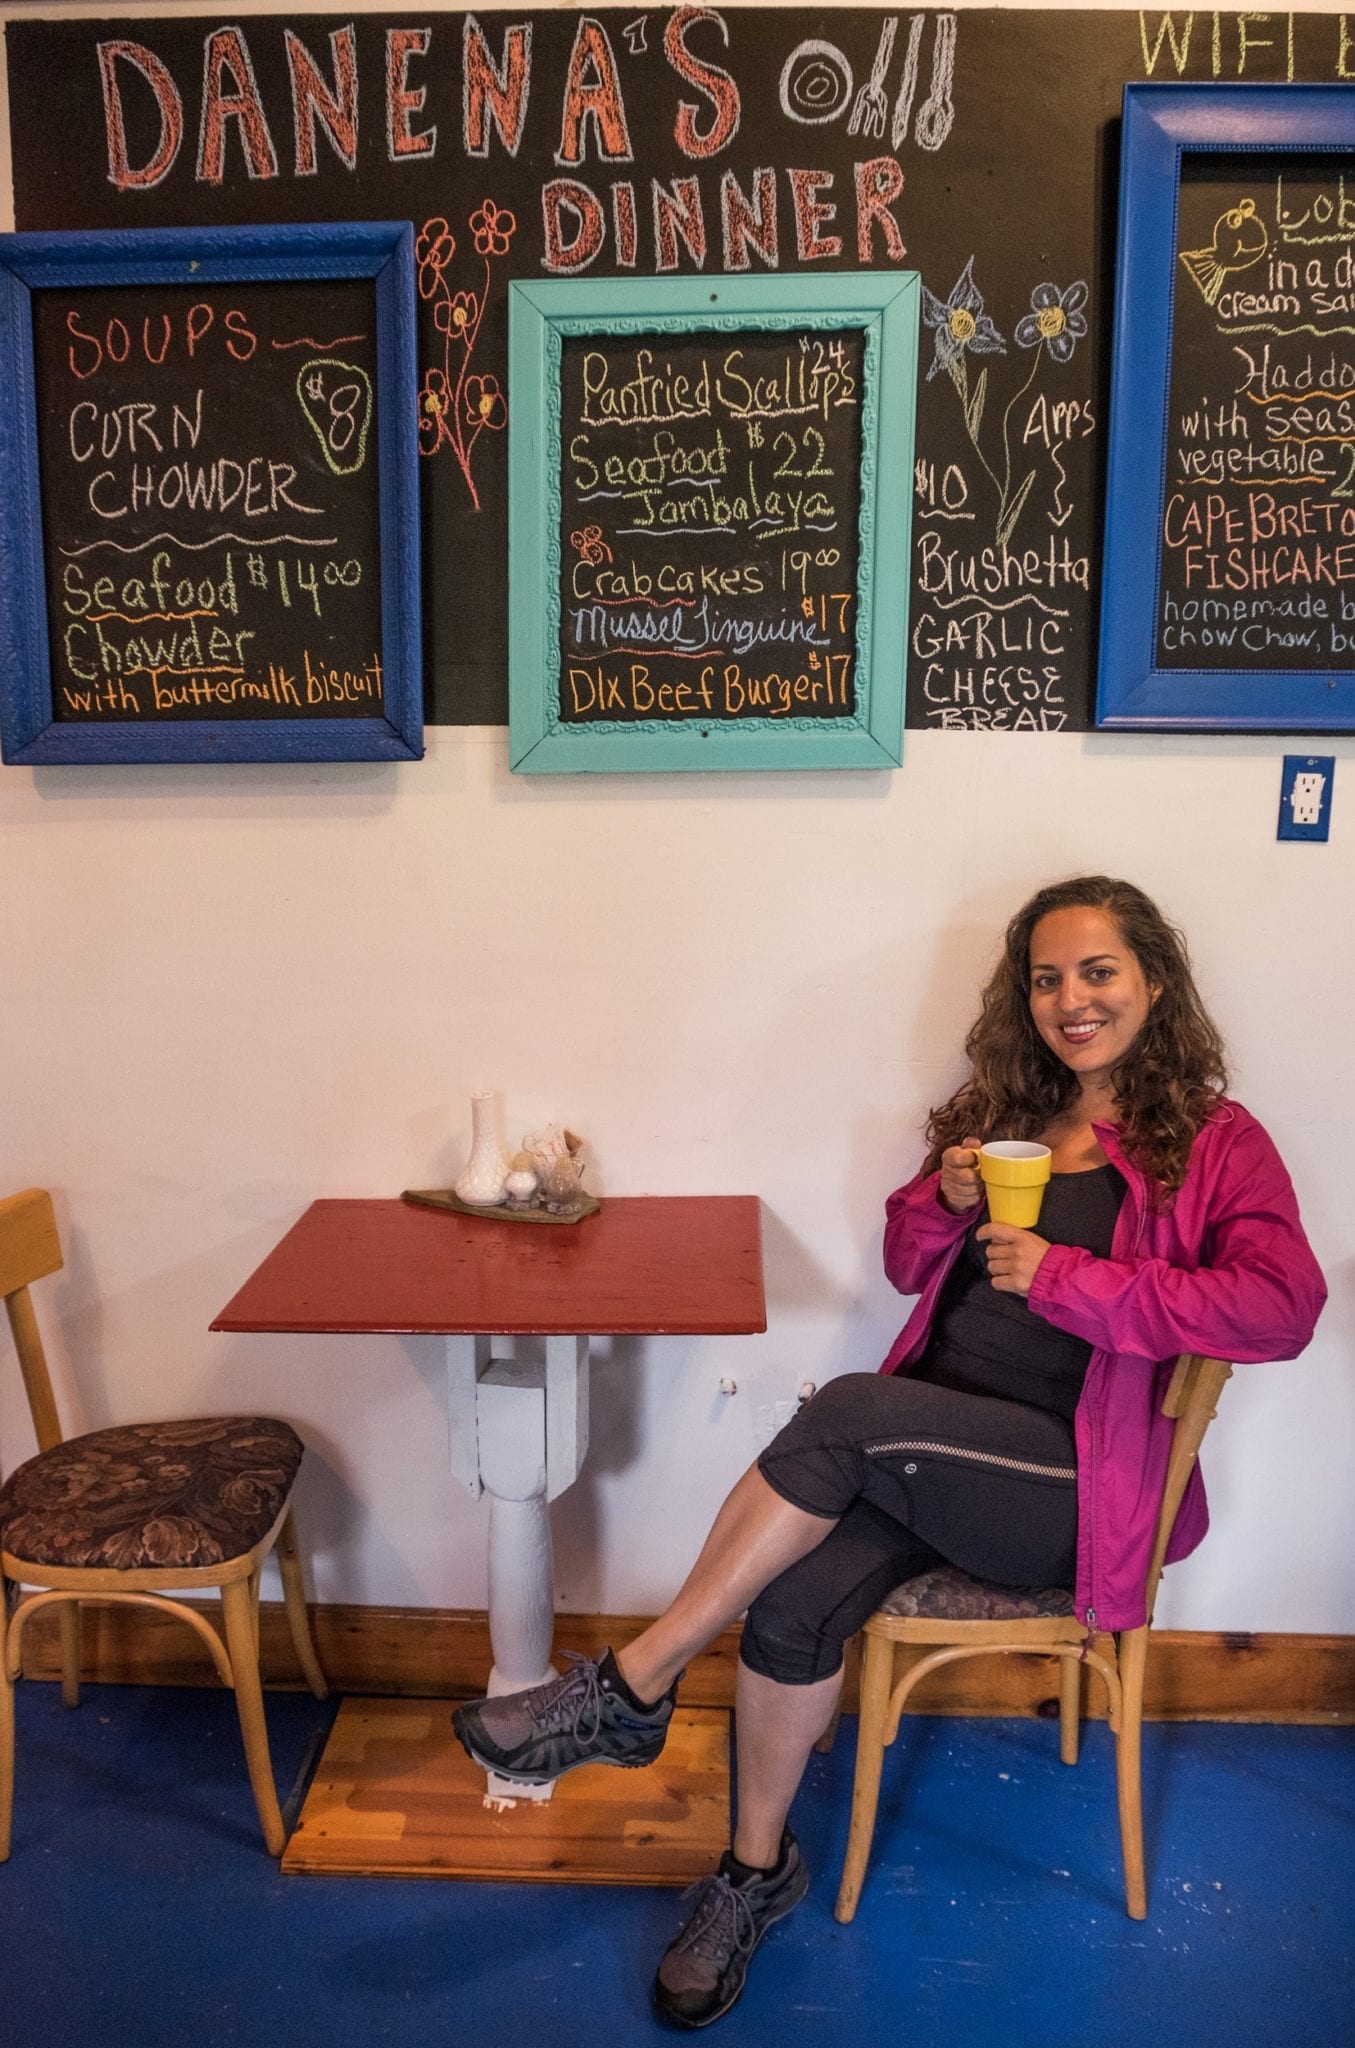 Kate wears a pink coat and smiles while holding a cup of coffee at a table beneath a blackboard detailing the restaurant's specials.